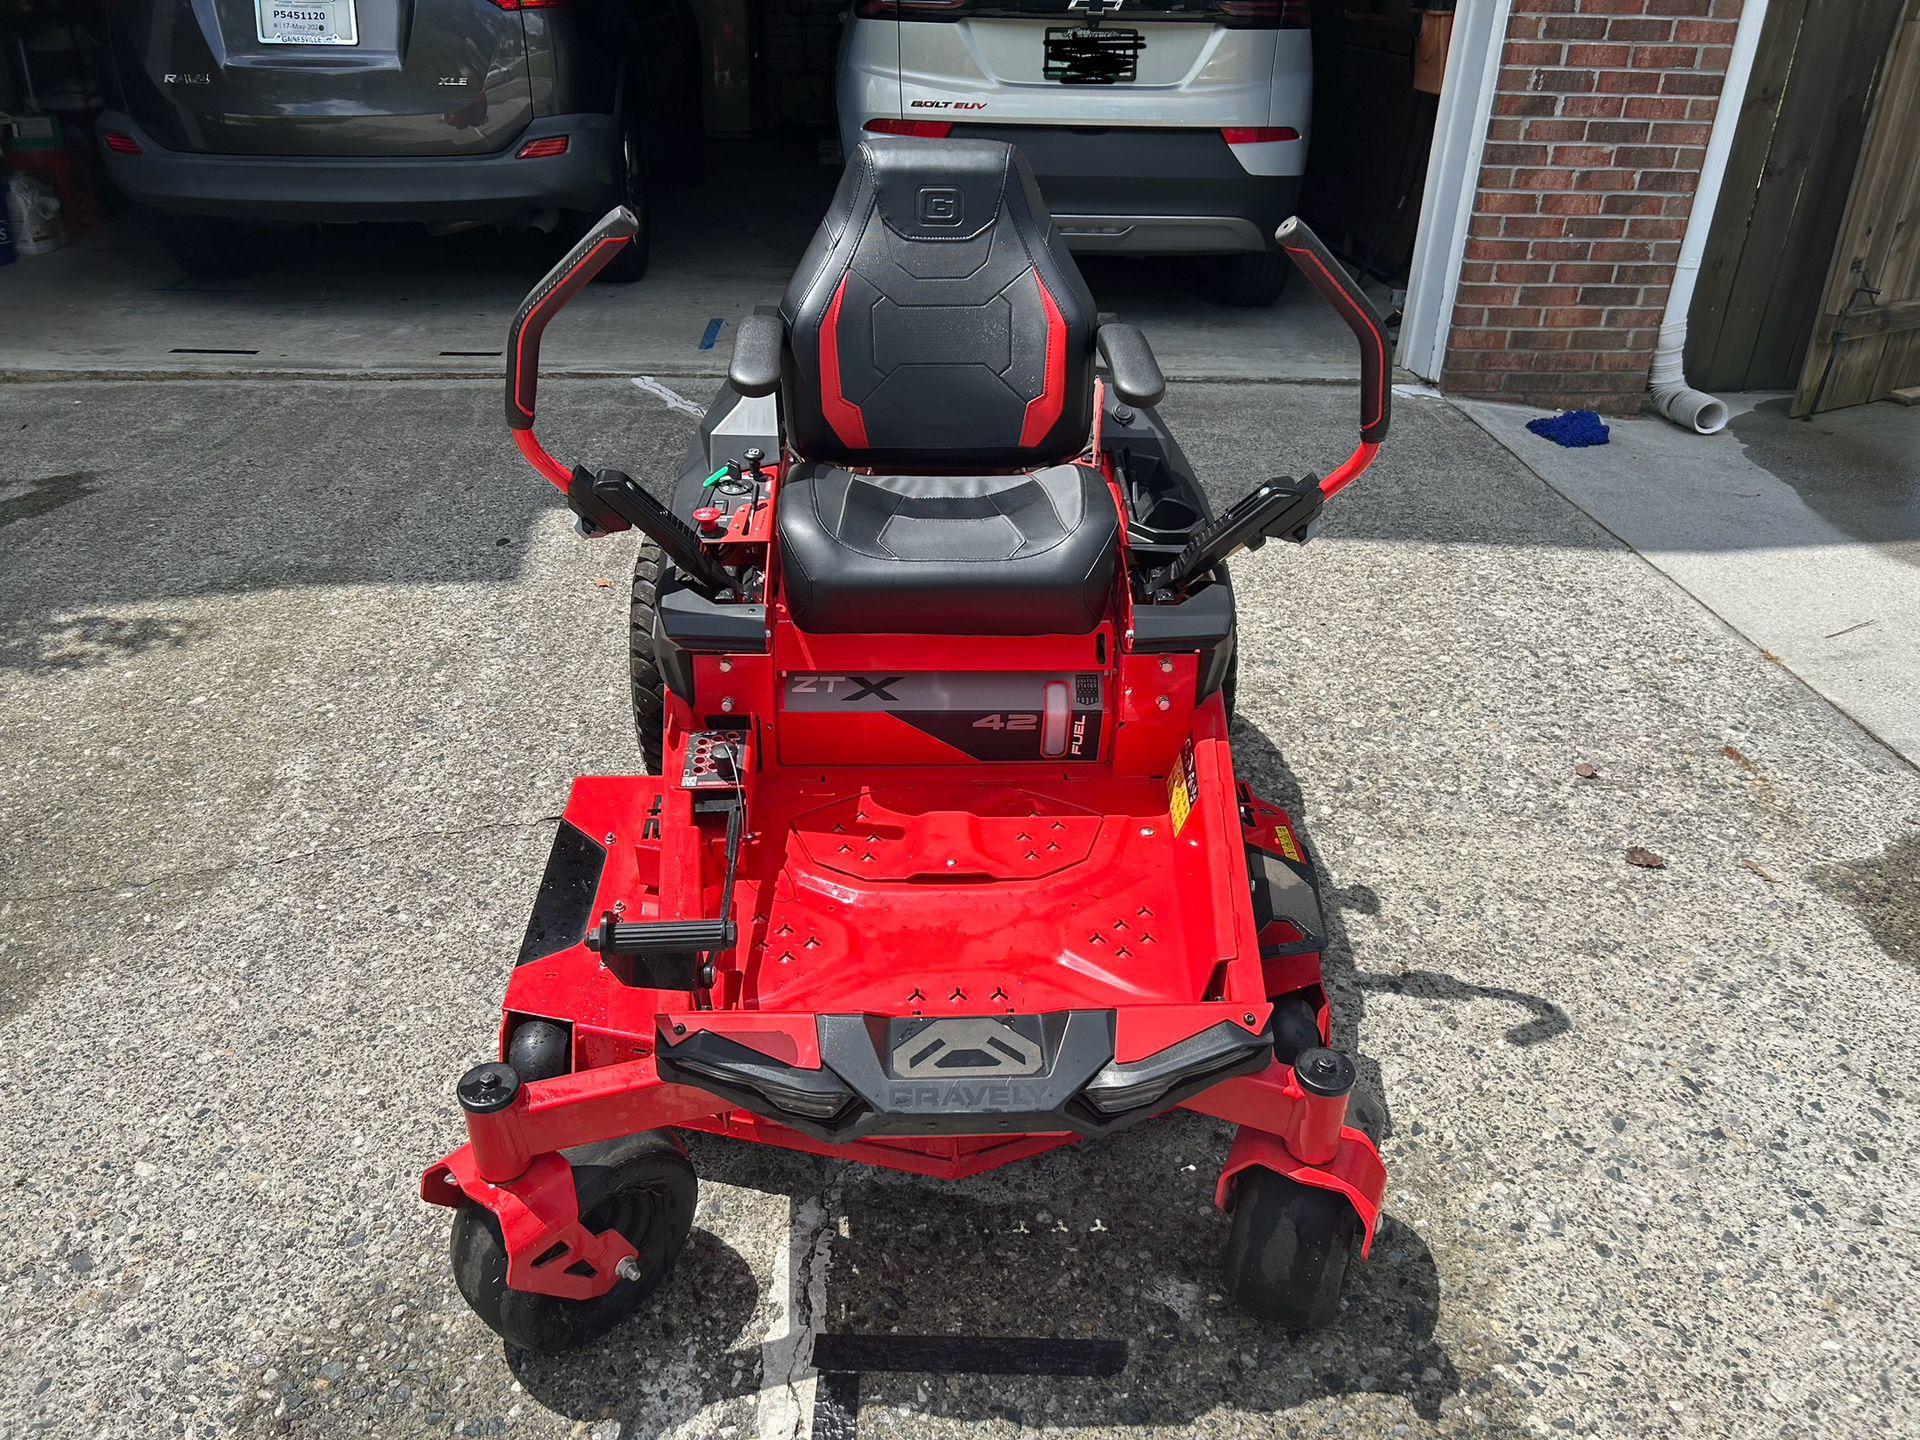 Gravely ZTX42 Zero Turn Lawn Mower For Sale-1 Year Of Usage